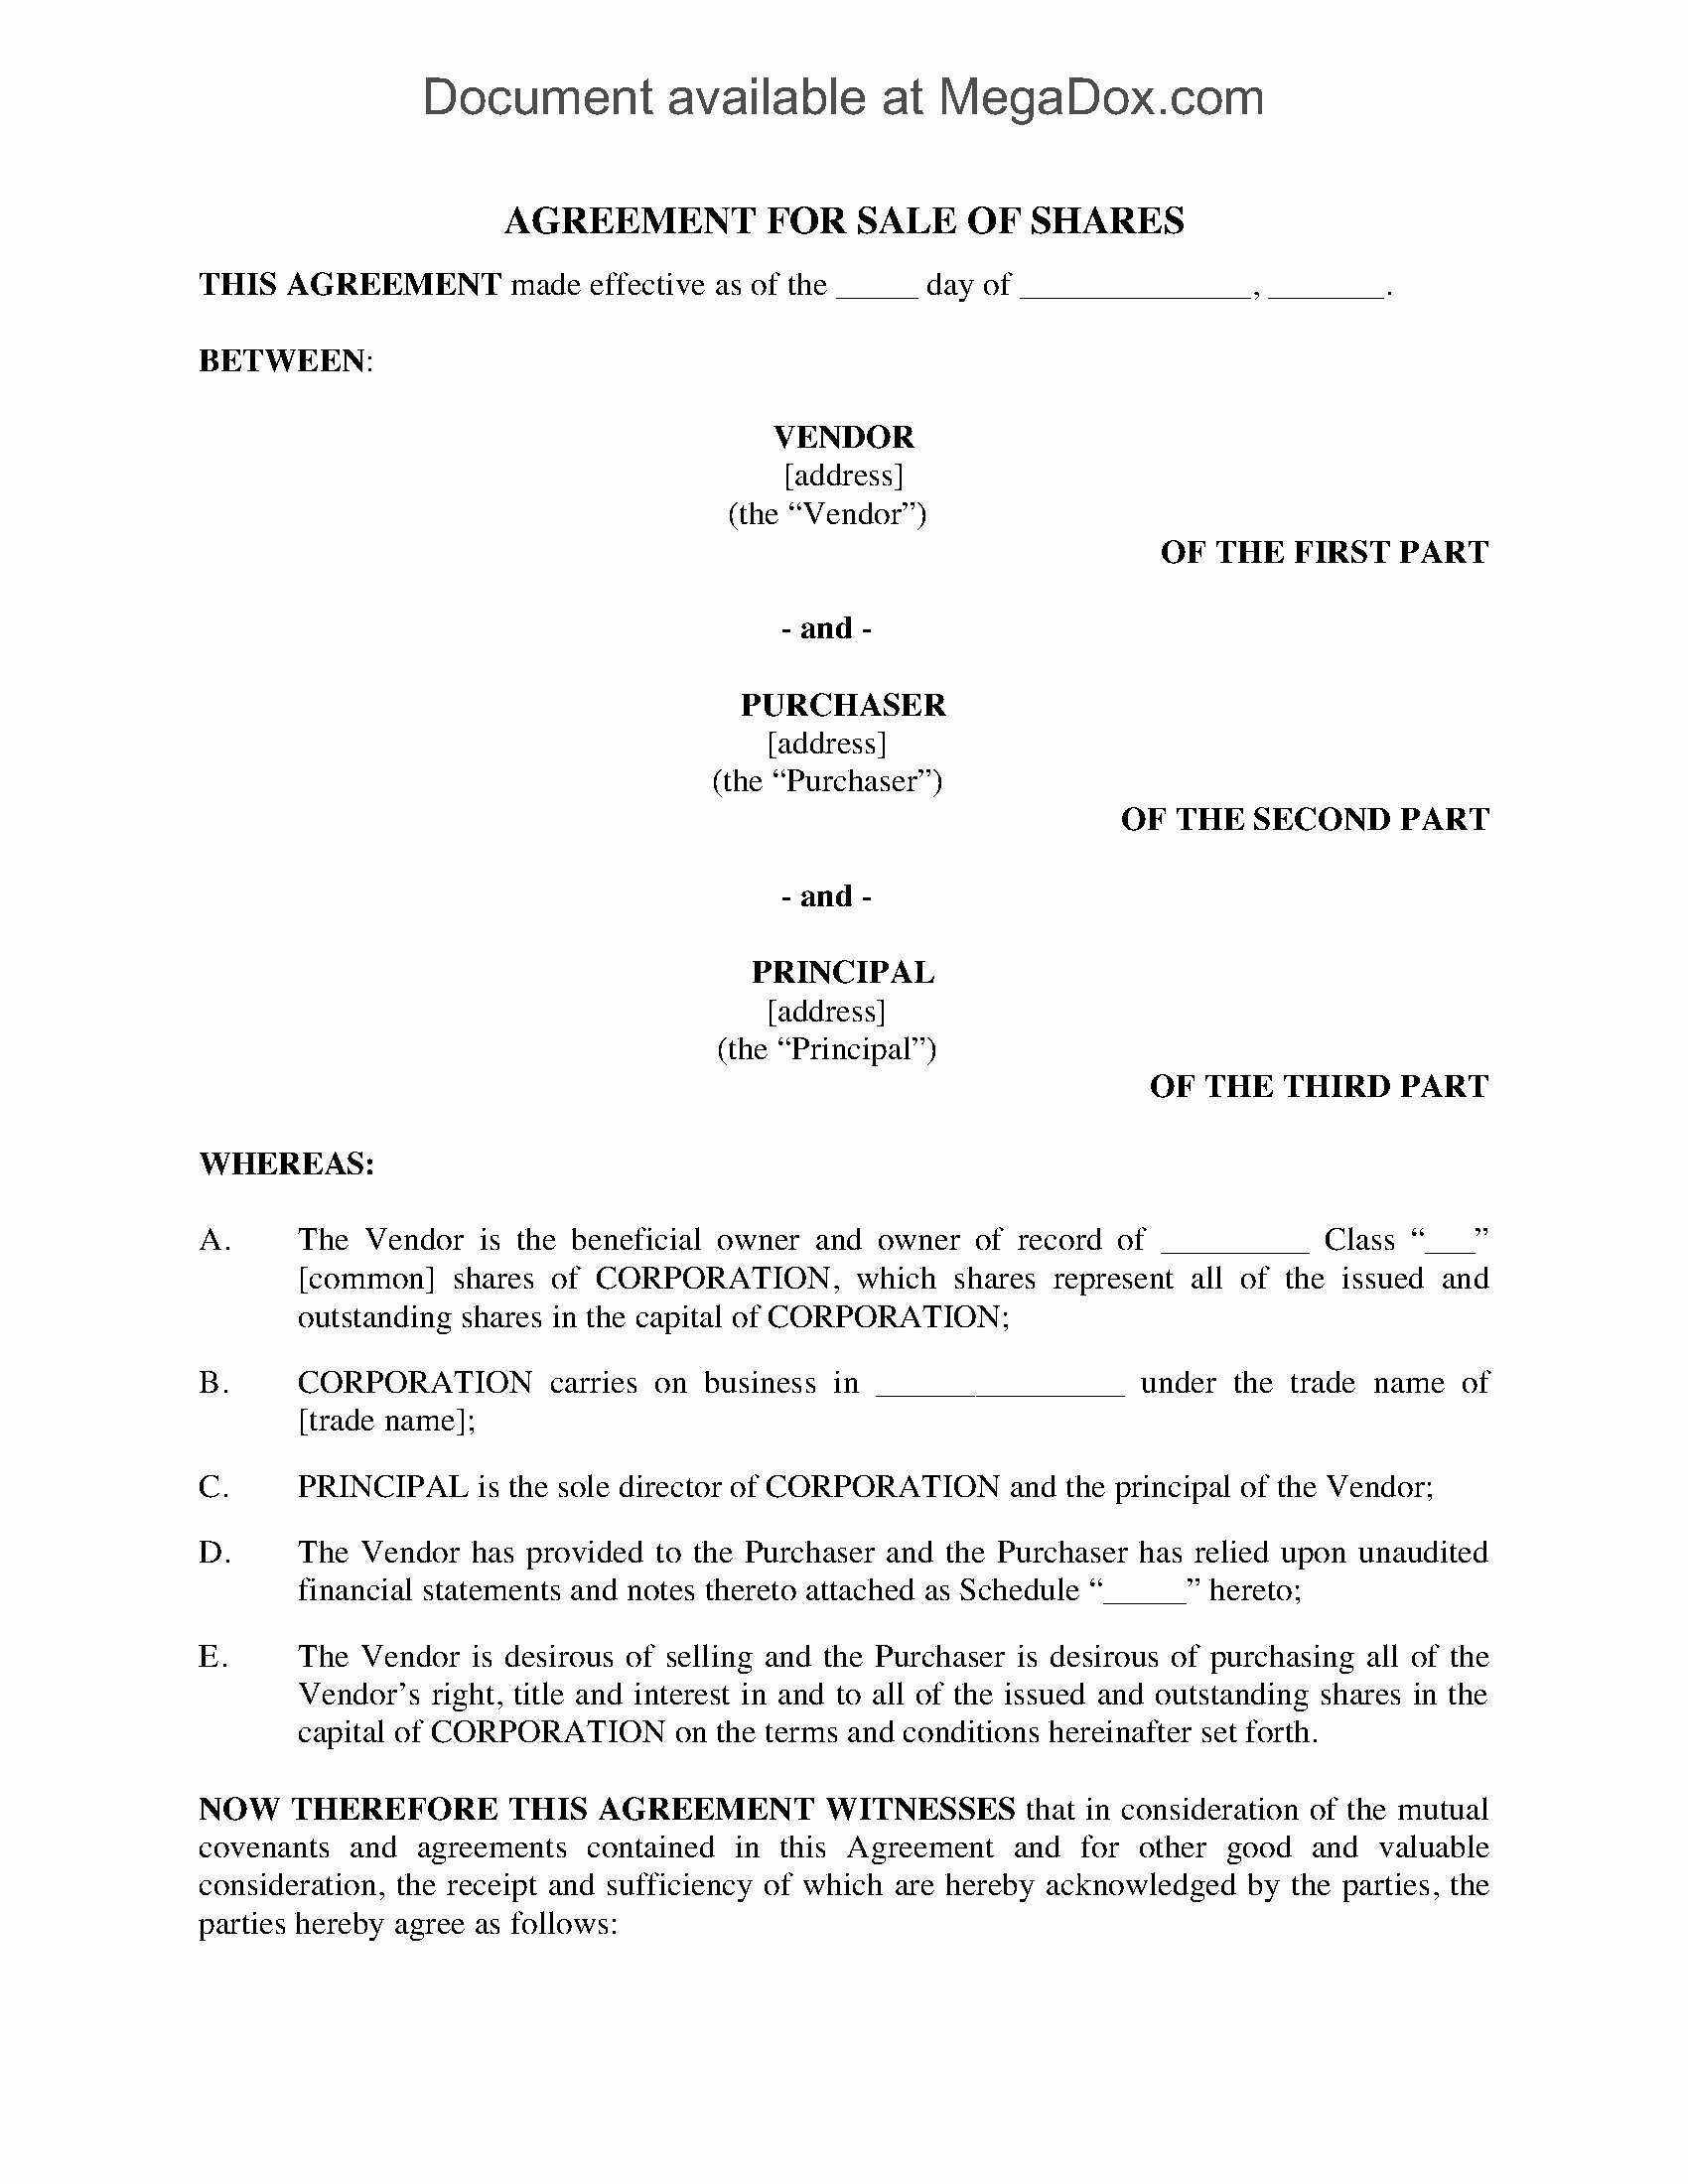 Share Purchase Agreement Template Unique Canada Purchase Agreement with Vendor Take Back